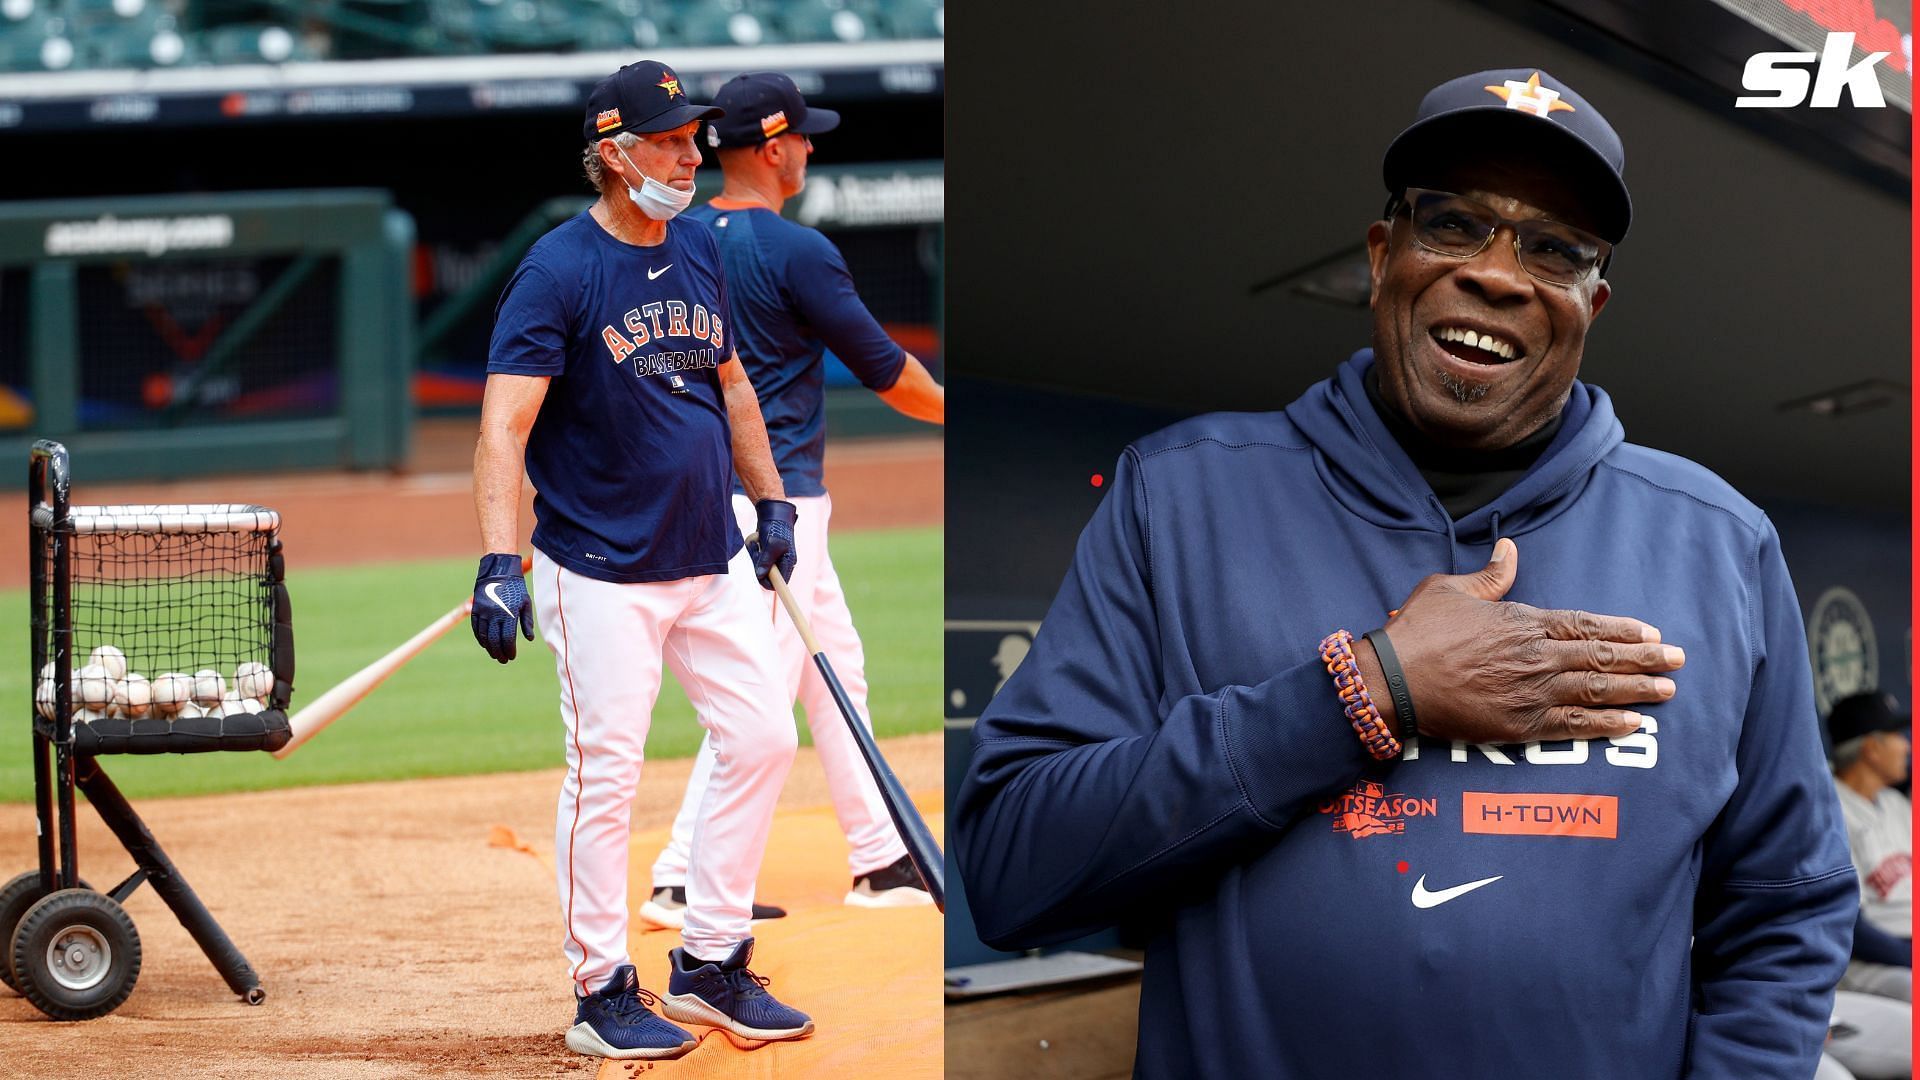 “A future Hall of Fame manager” – Dusty Baker’s successor has kind words for departing Astros skipper